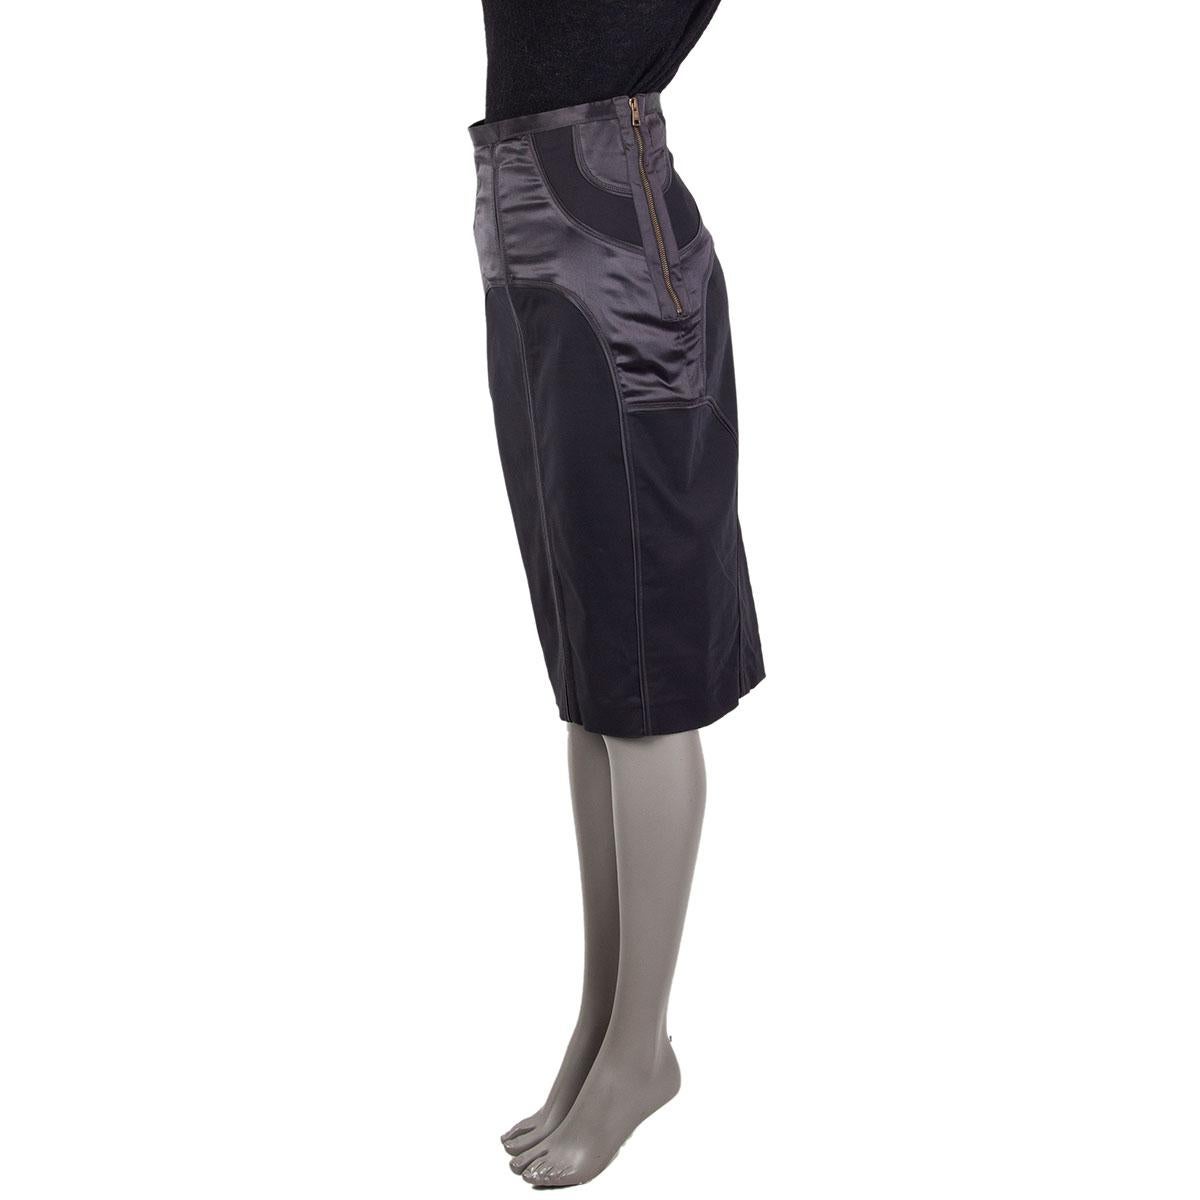 Gucci structured pencil skirt in anthracite grey viscose (57%), polyamide (35%), elastane (5%) and silk 3%. Top part lined in viscose (62%) and polyester (38%). Opens with a zipper on the side. Has been worn and it is in excellent condition.

Tag